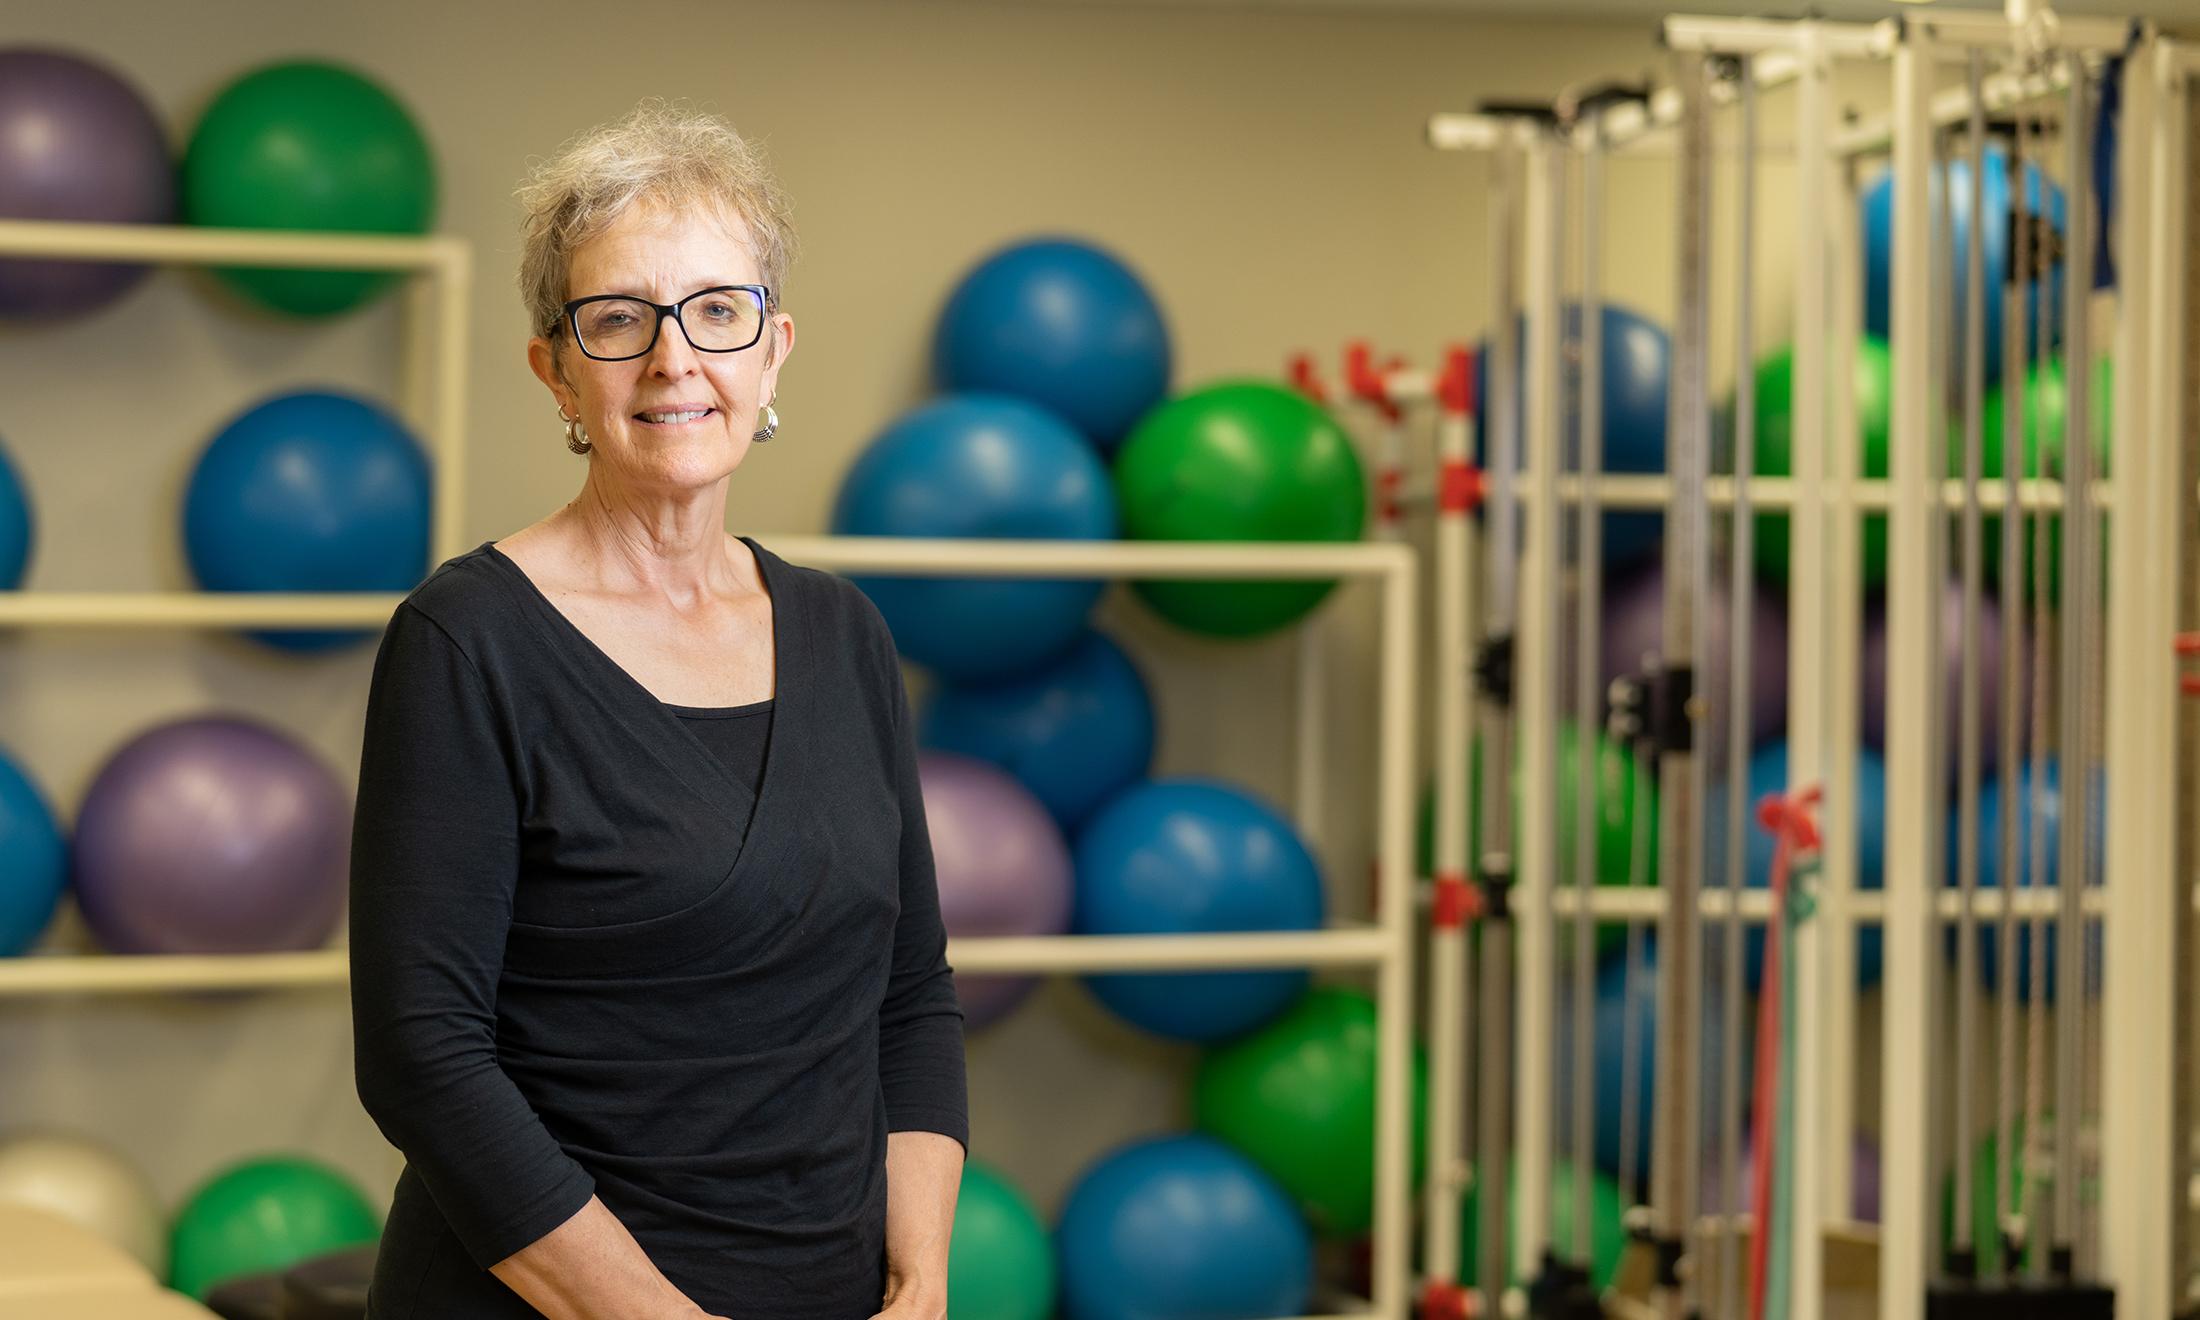 A woman standing in a room with exercise equipment behind her